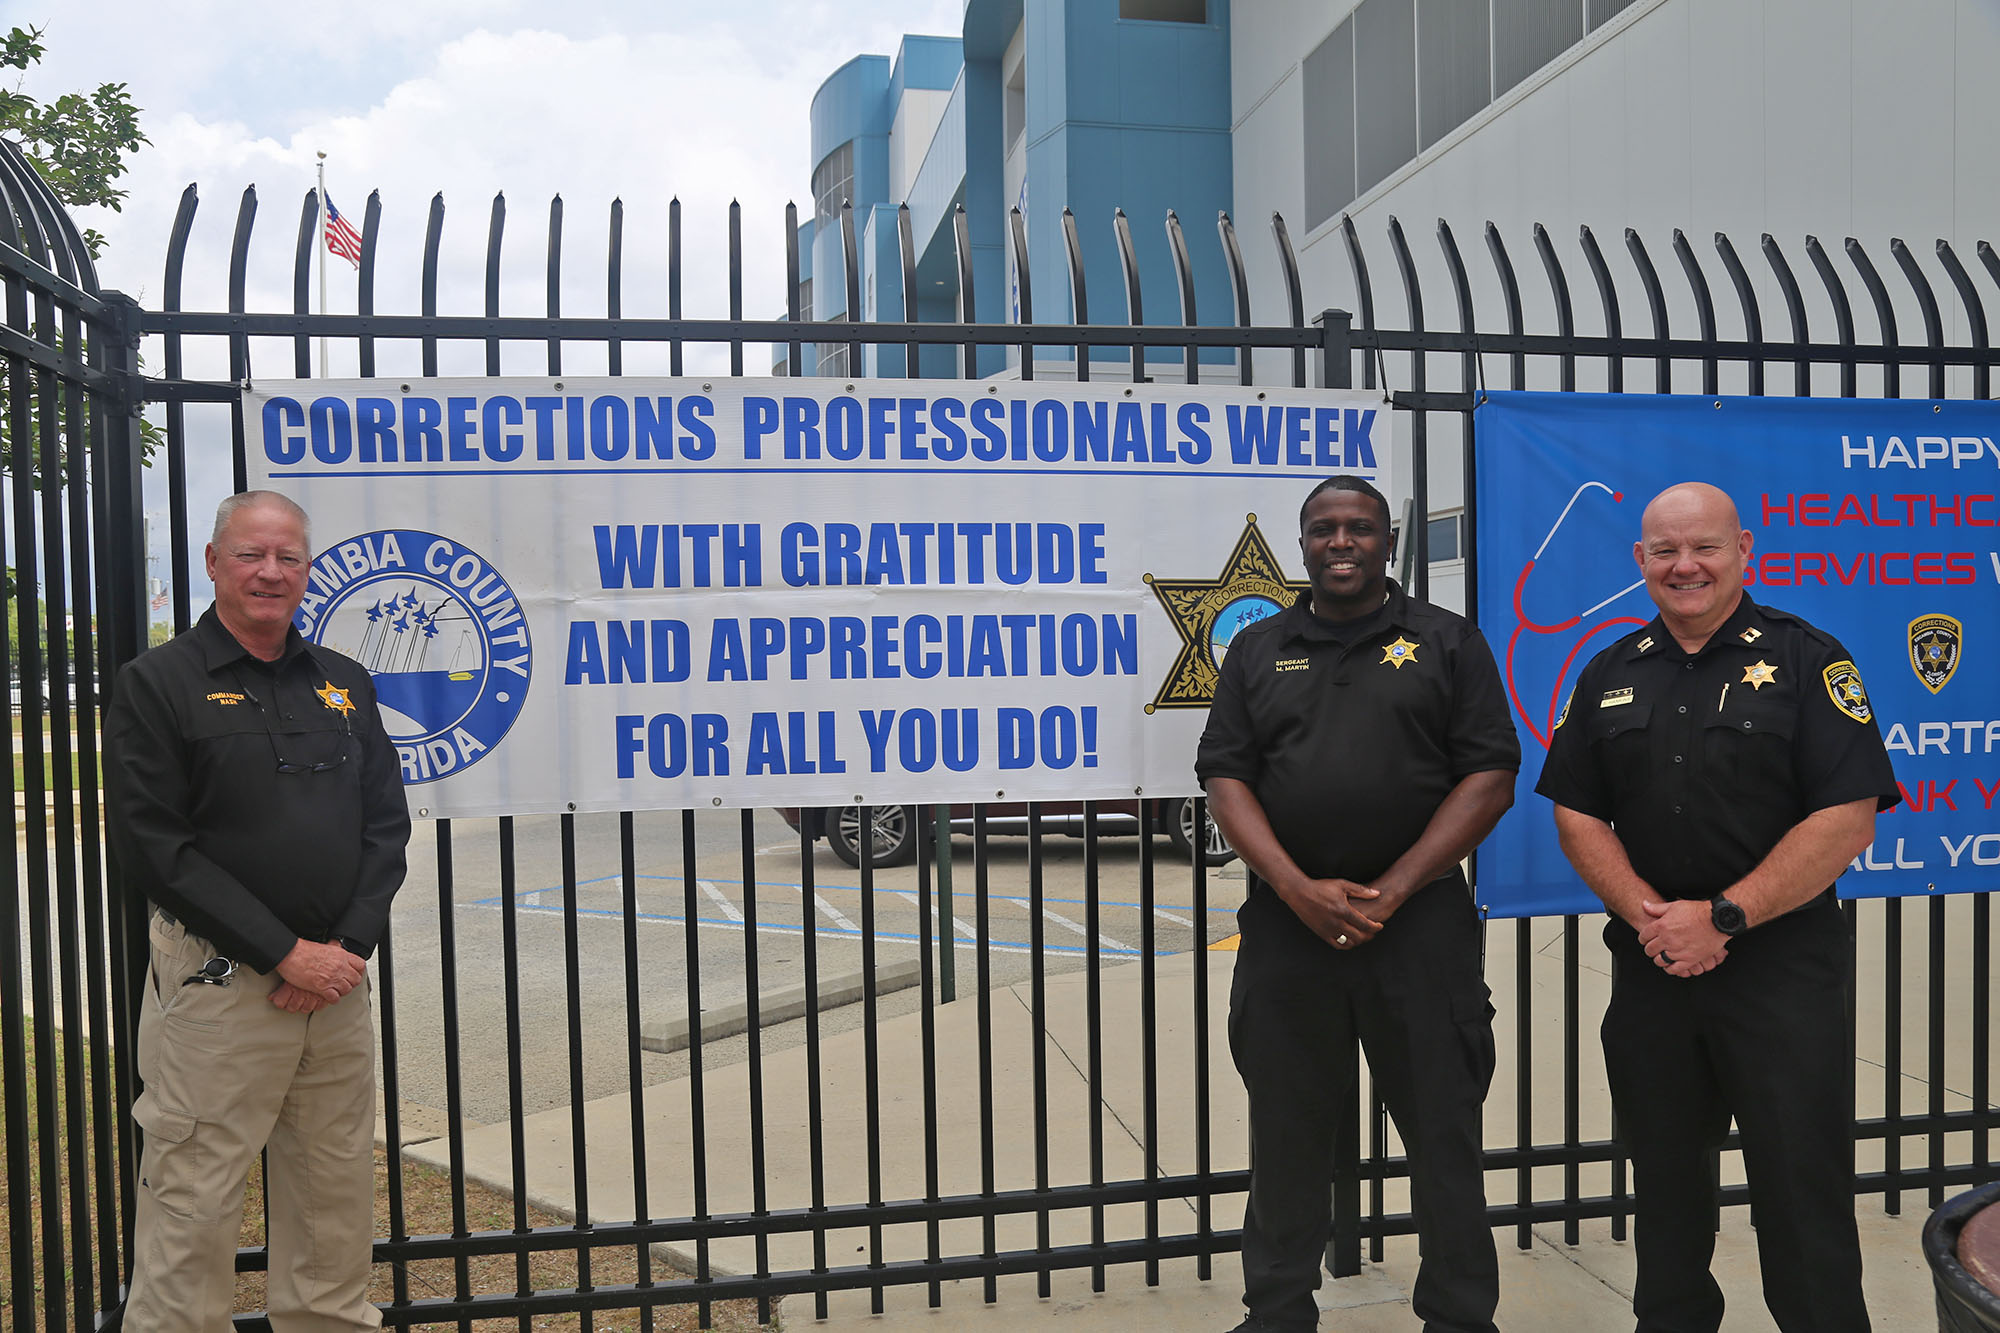 Corrections Officers During Corrections Professionals Week